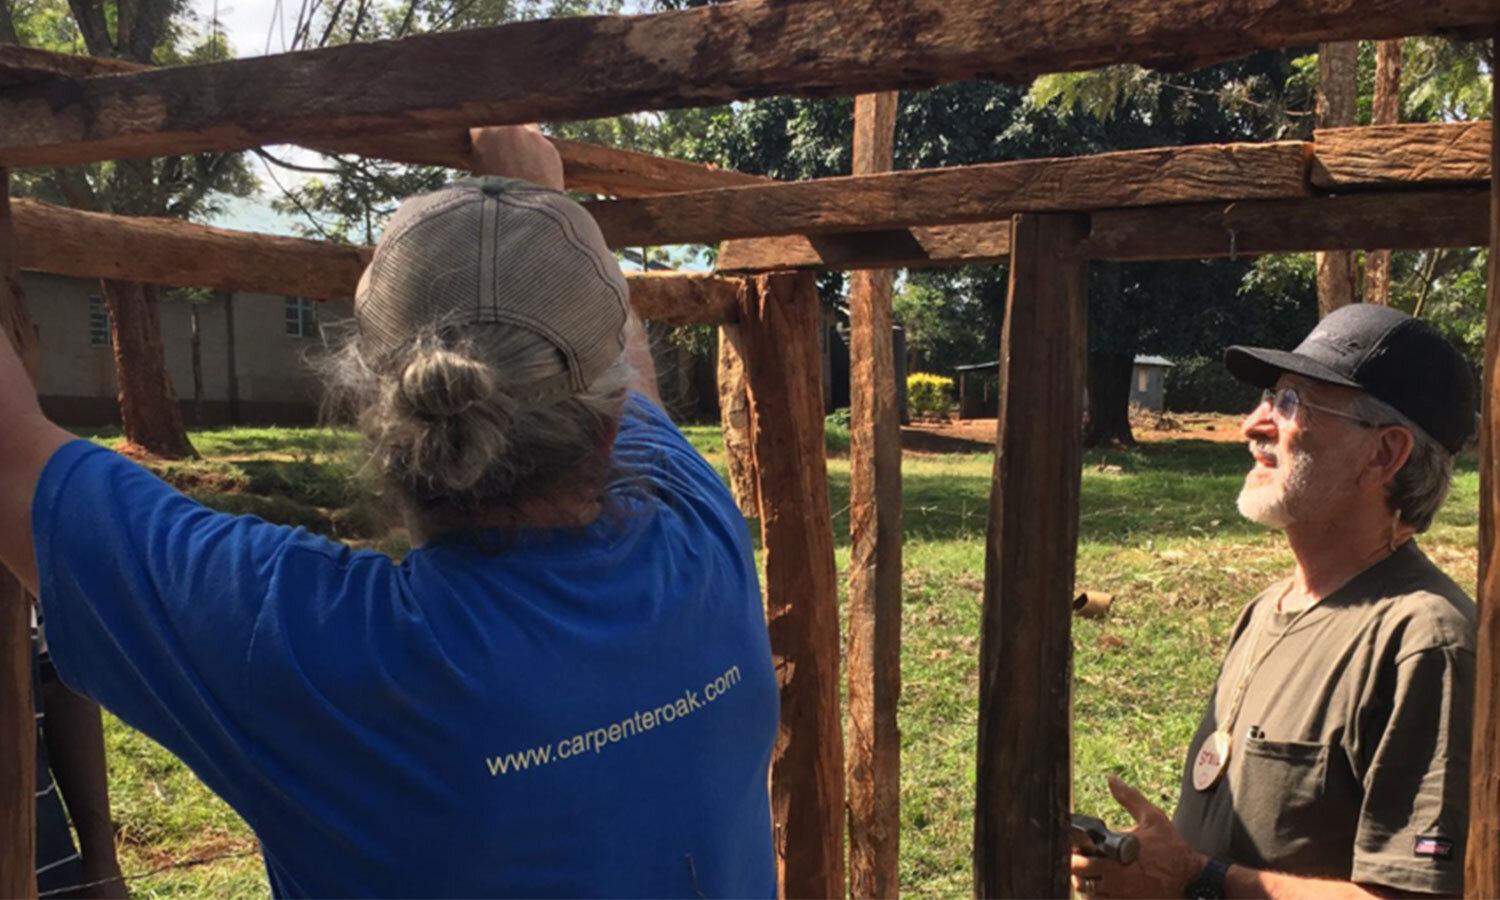   TGE volunteers work to construct a water tower during Week One of the 2018 Project Trip.  